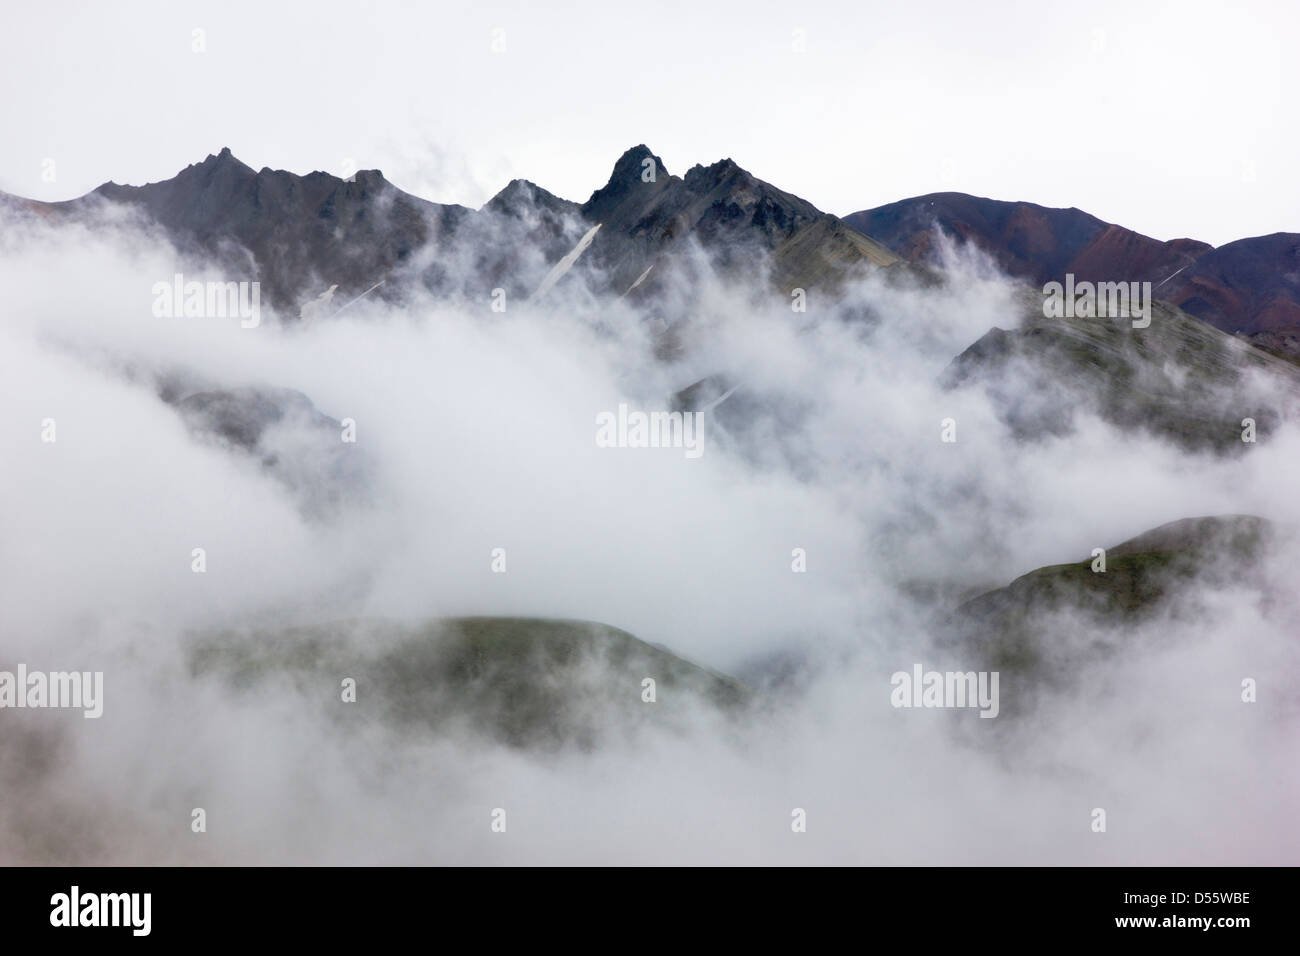 Low clouds, mist and fog partially obscure the Alaska Range, Denali National Park, Alaska, USA Stock Photo